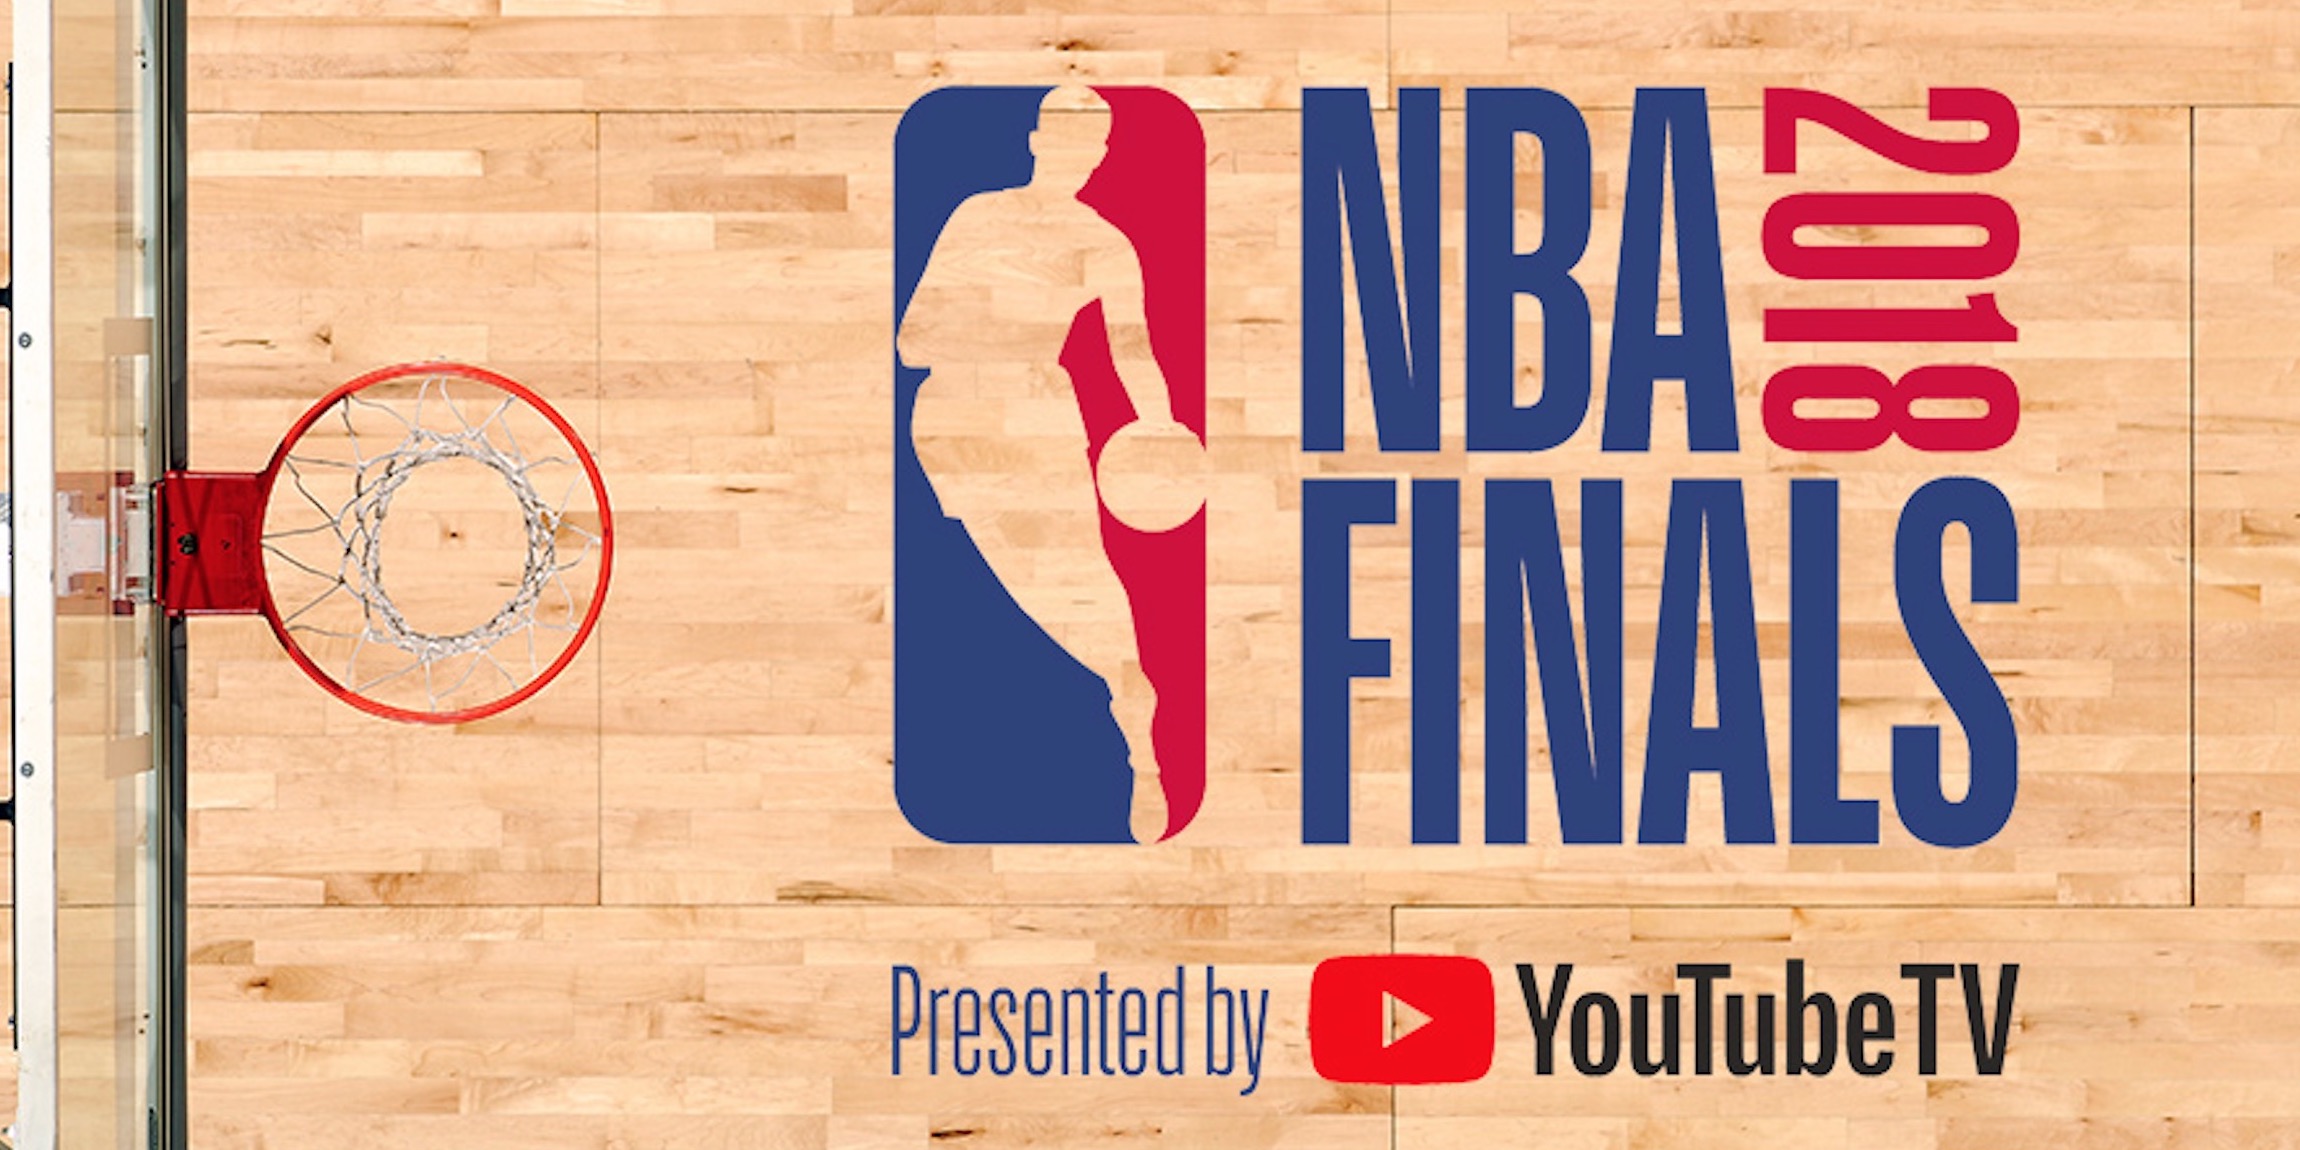 YouTube TV to present 2018 NBA Finals following successful World Series sponsorship